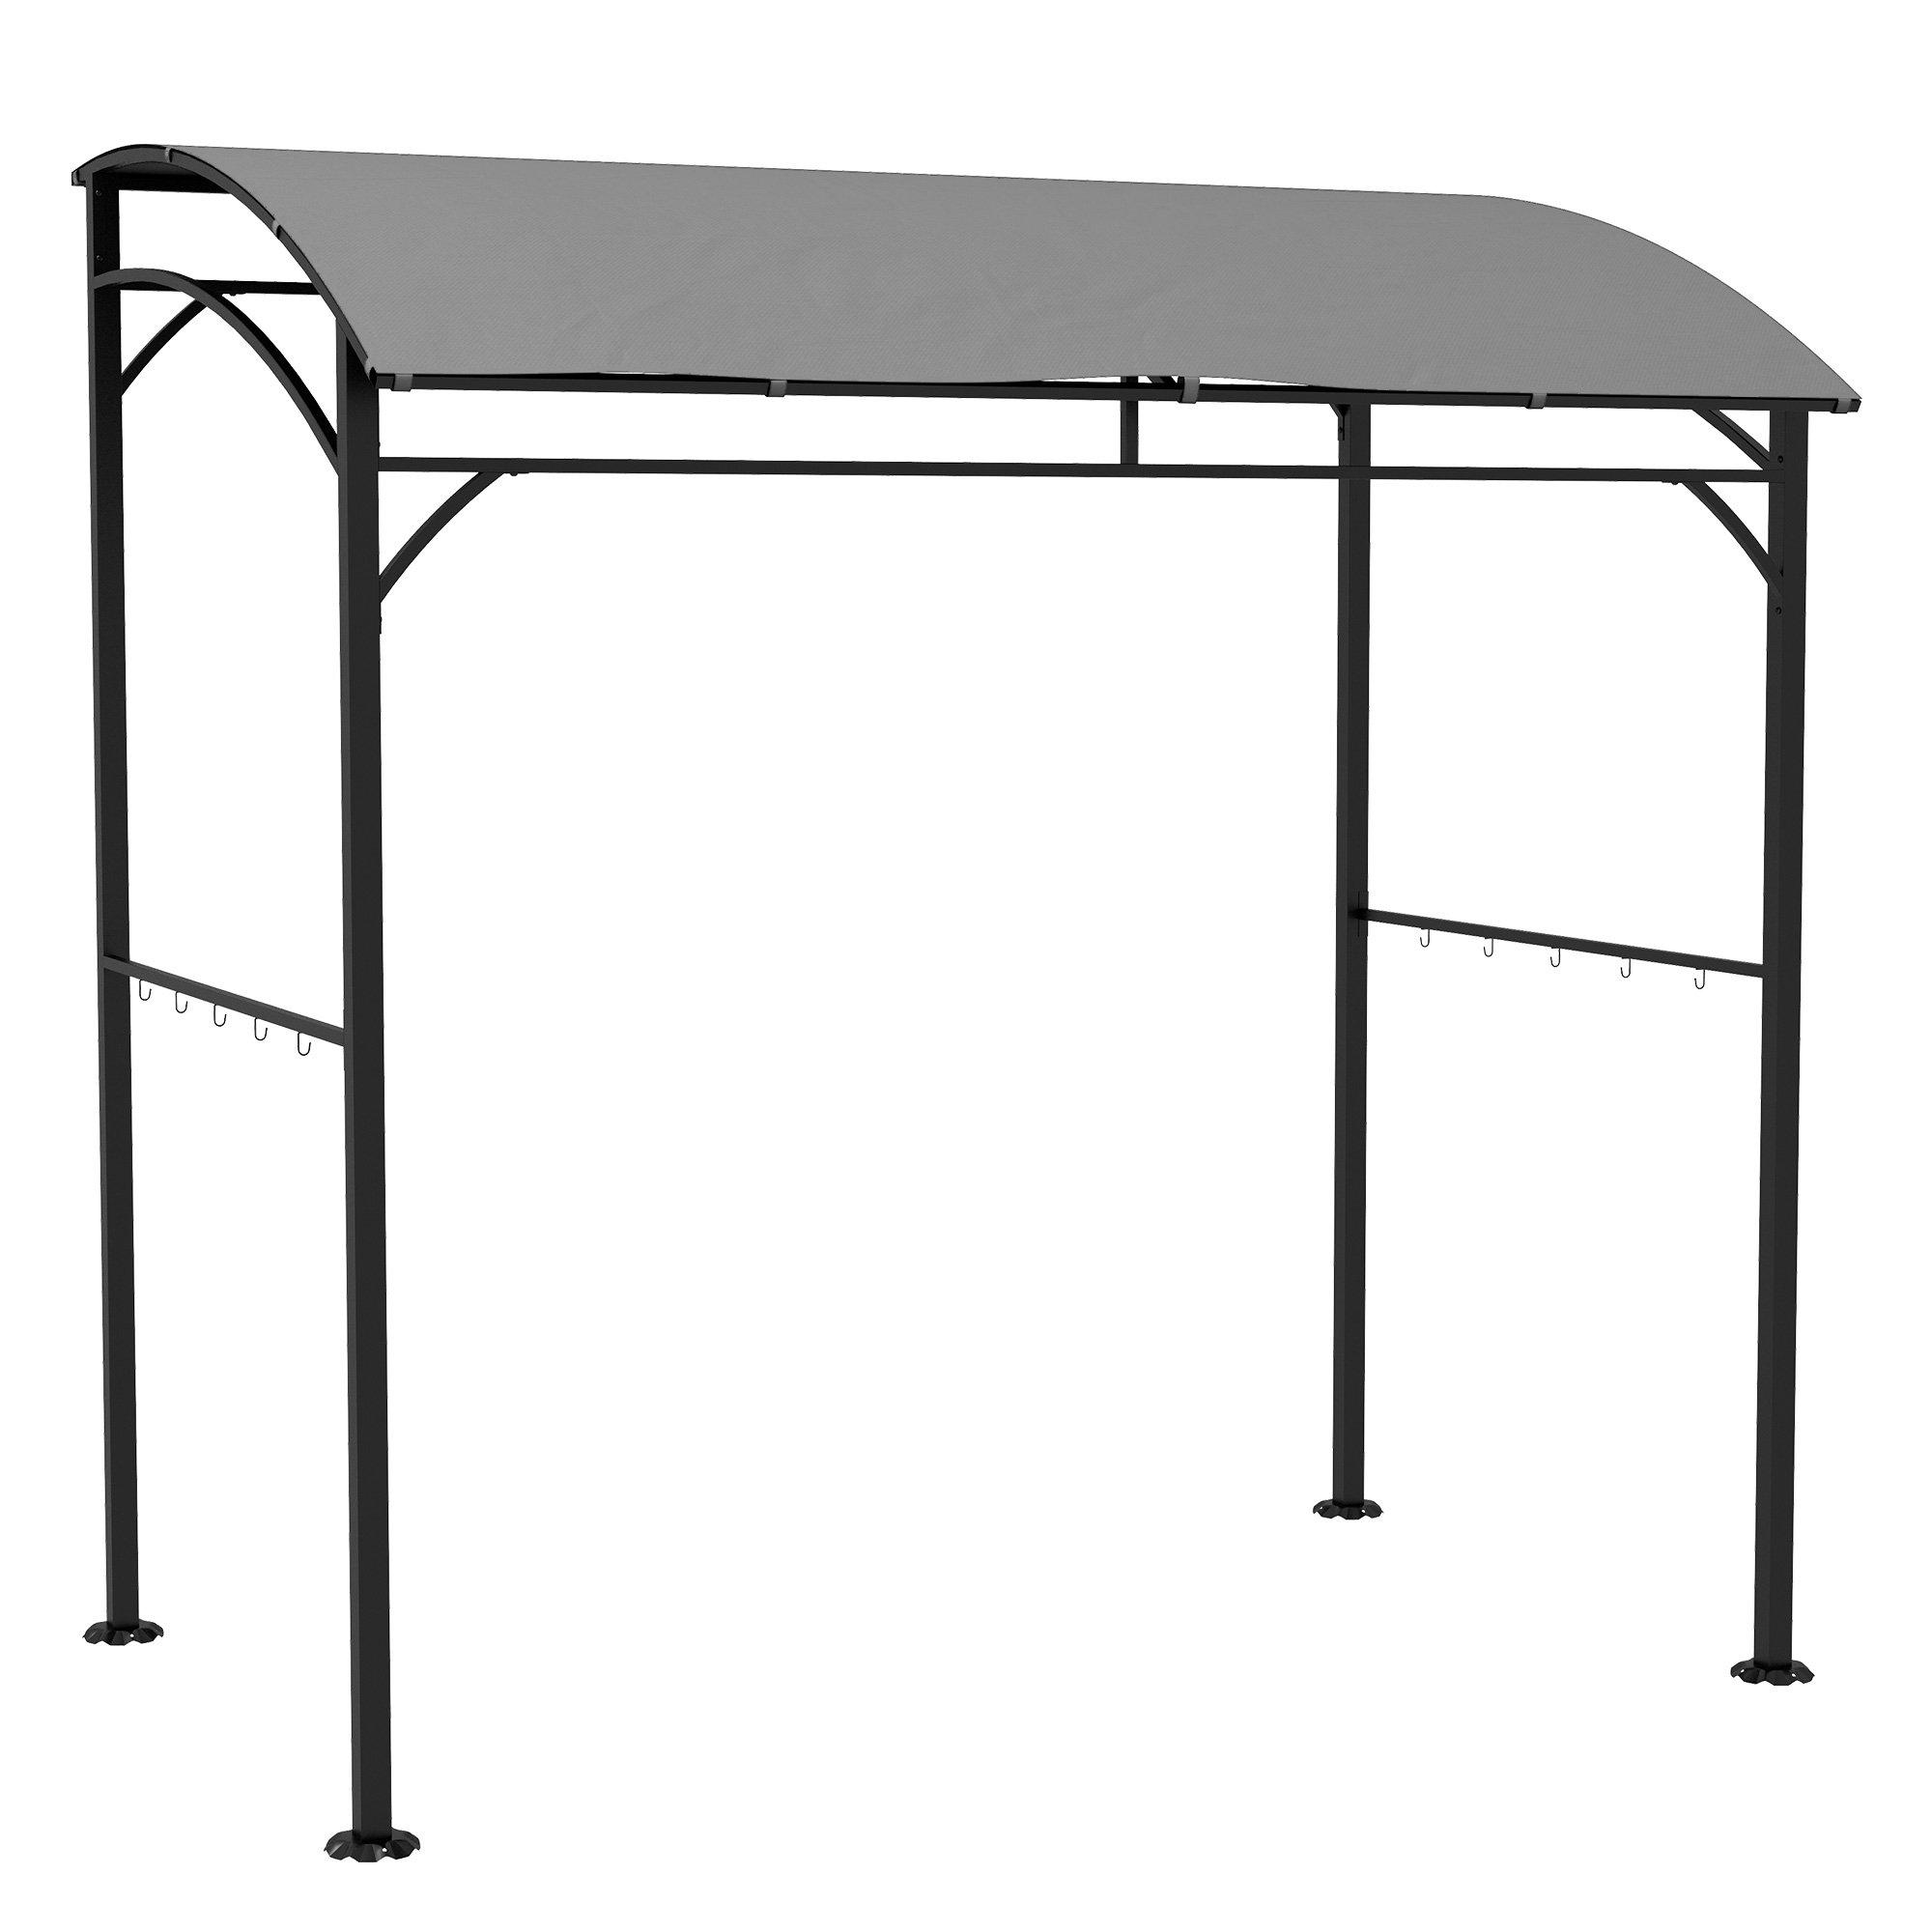 2.2 x 1.5 m BBQ Gazebo Tent Sun Shade with Canopy and 10 Hooks